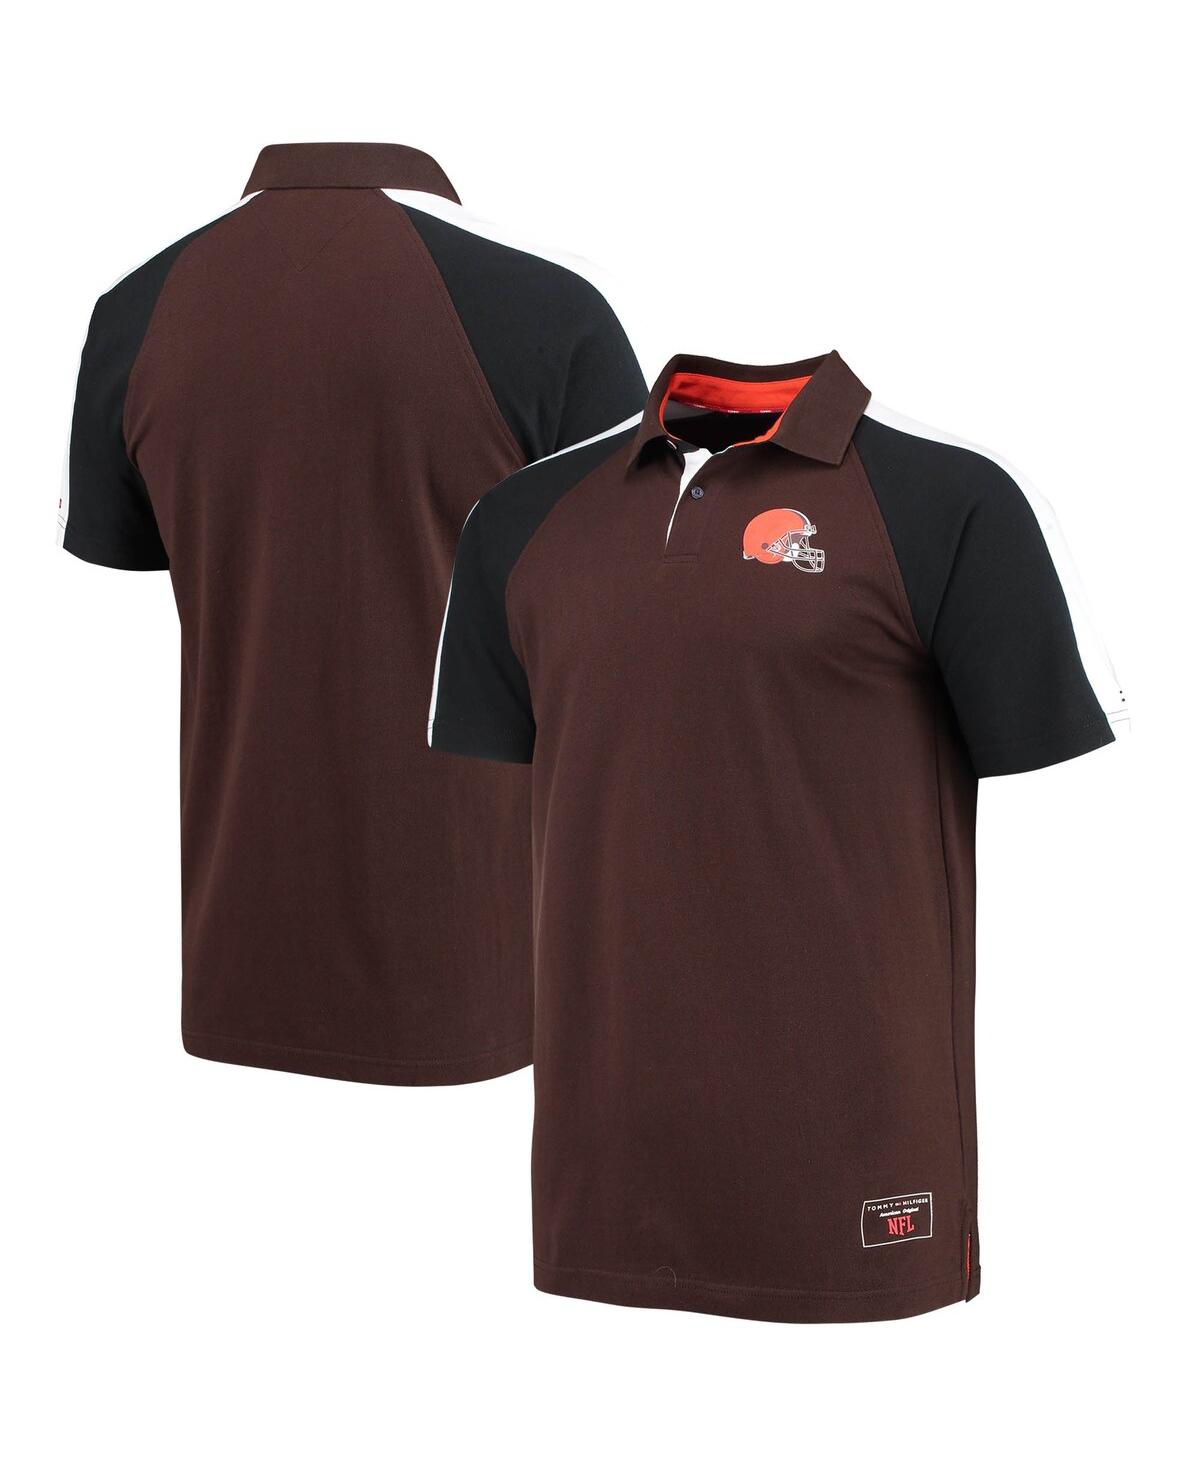 UPC 195195410649 product image for Men's Tommy Hilfiger Brown and White Cleveland Browns Holden Raglan Polo Shirt | upcitemdb.com